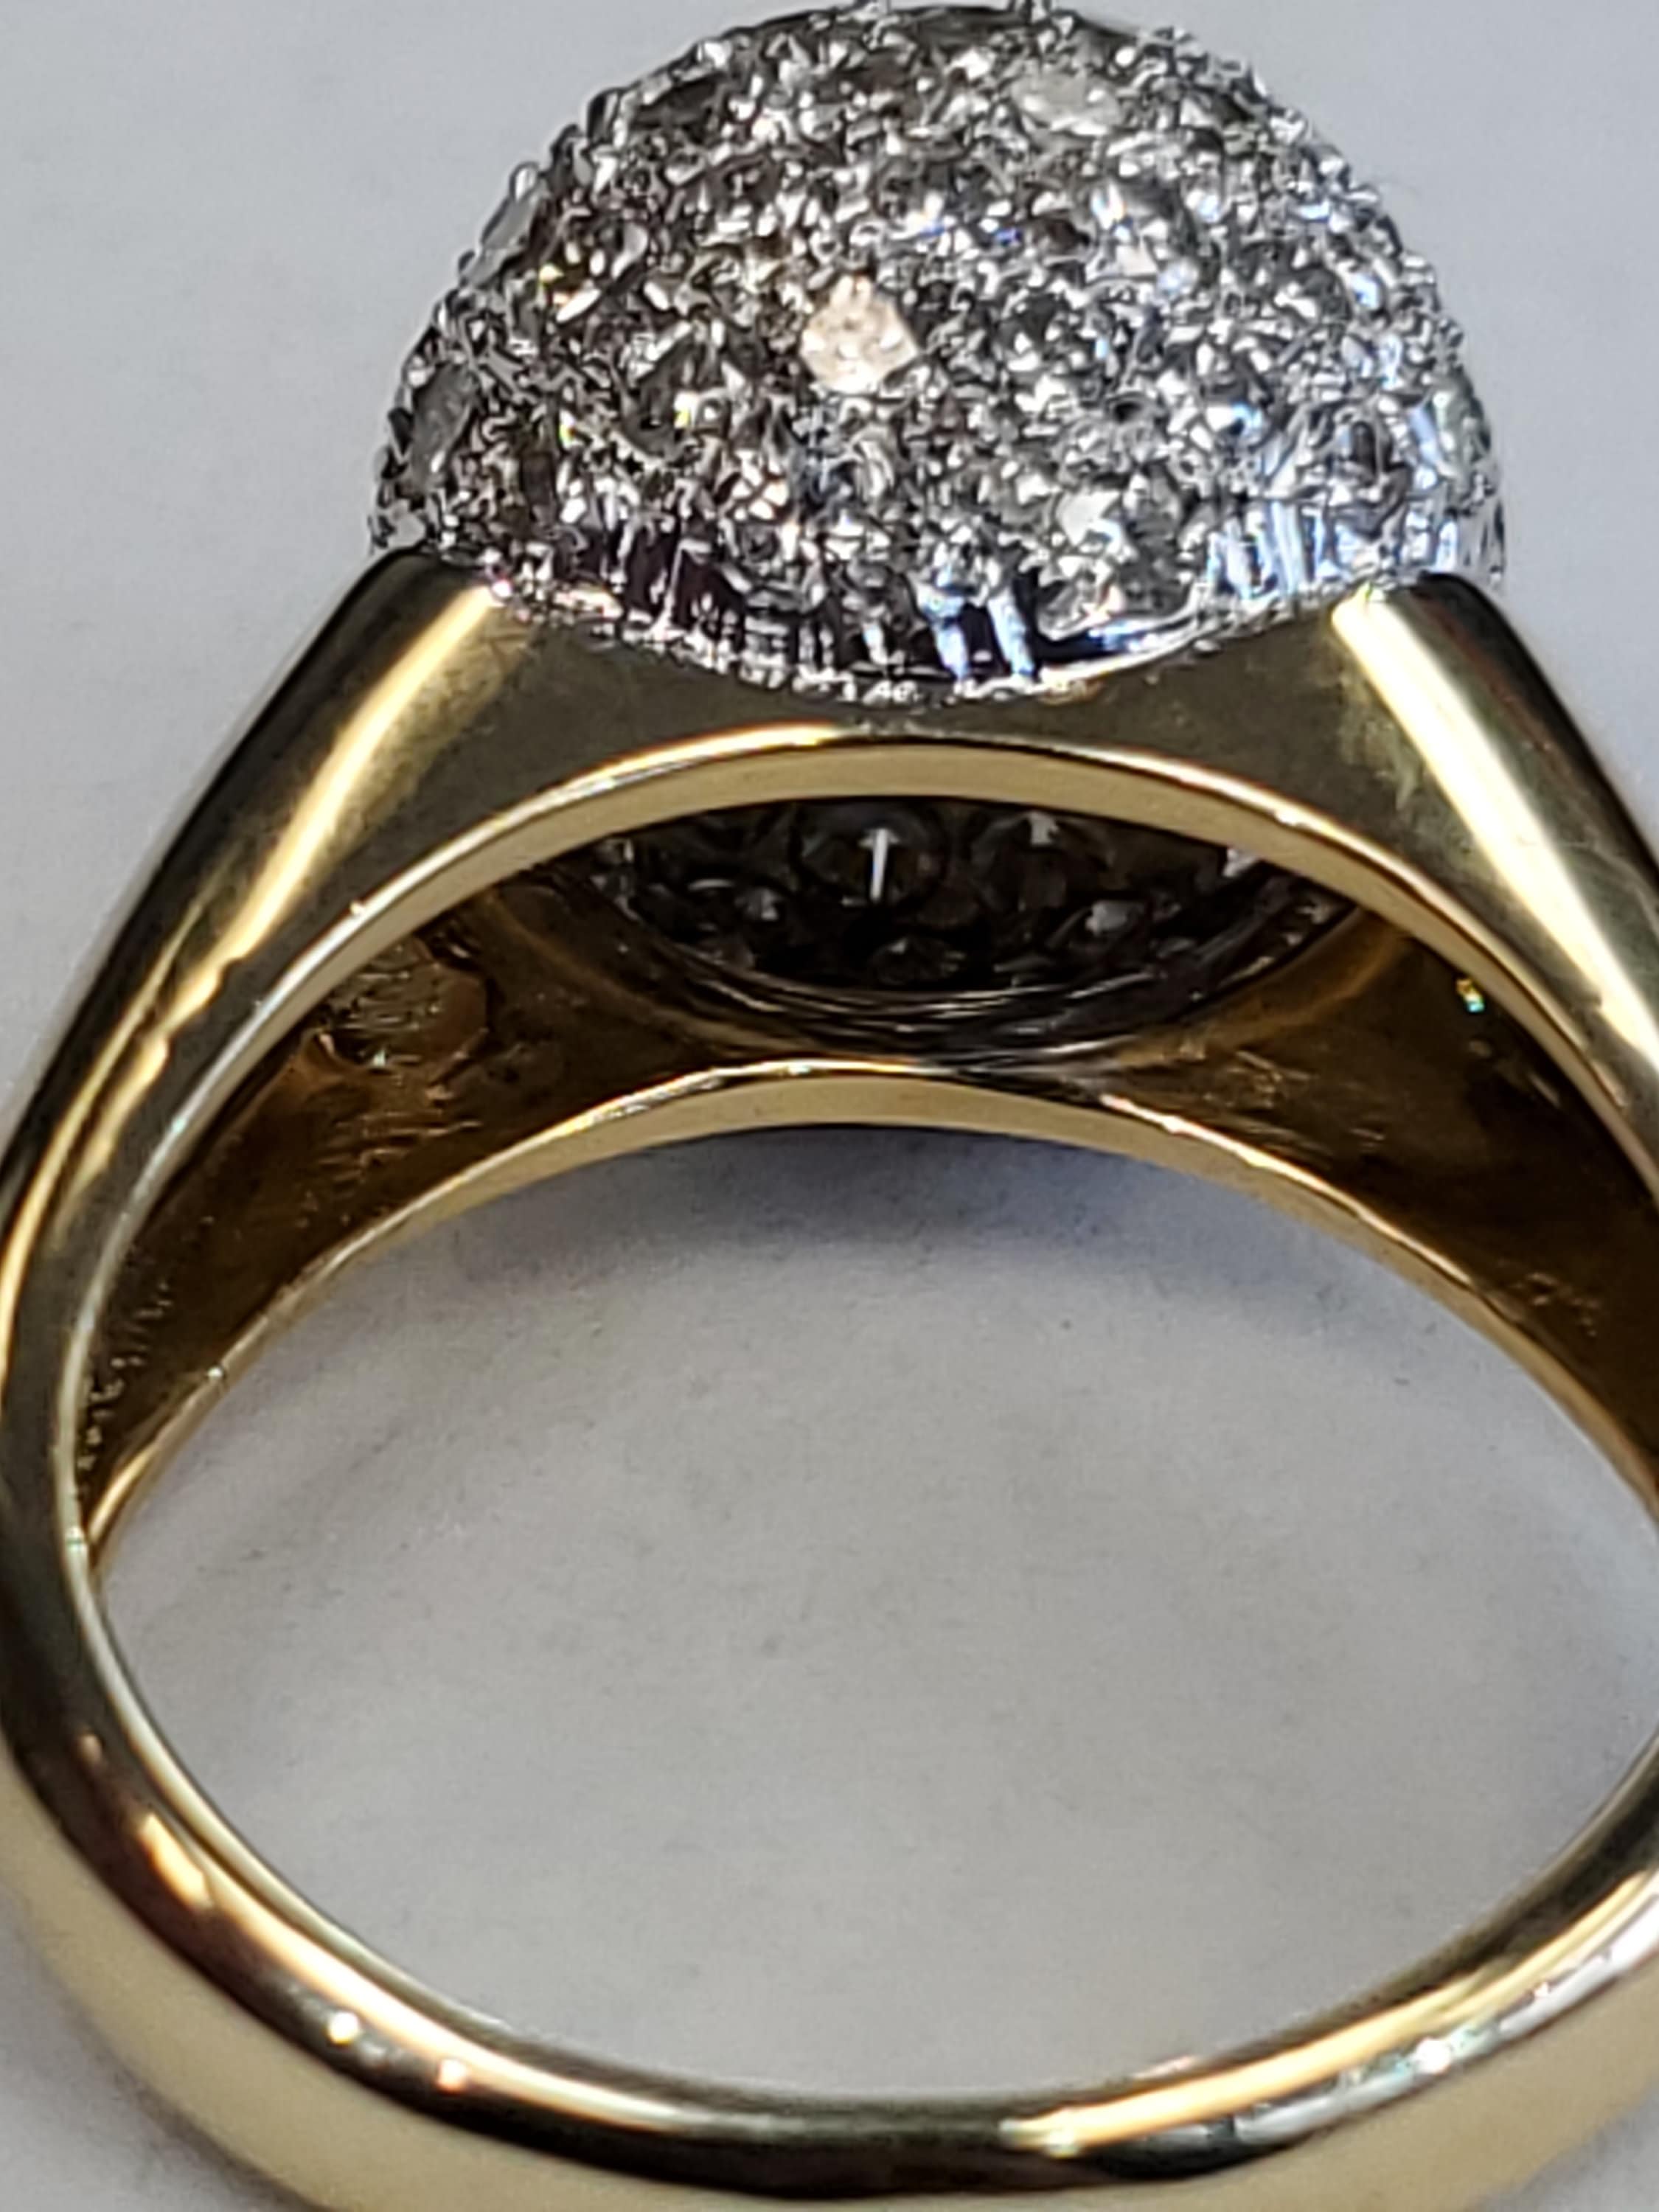 Product Image for Diamond Moon Ring 3.5cttw Pave in 18k yellow gold size 8